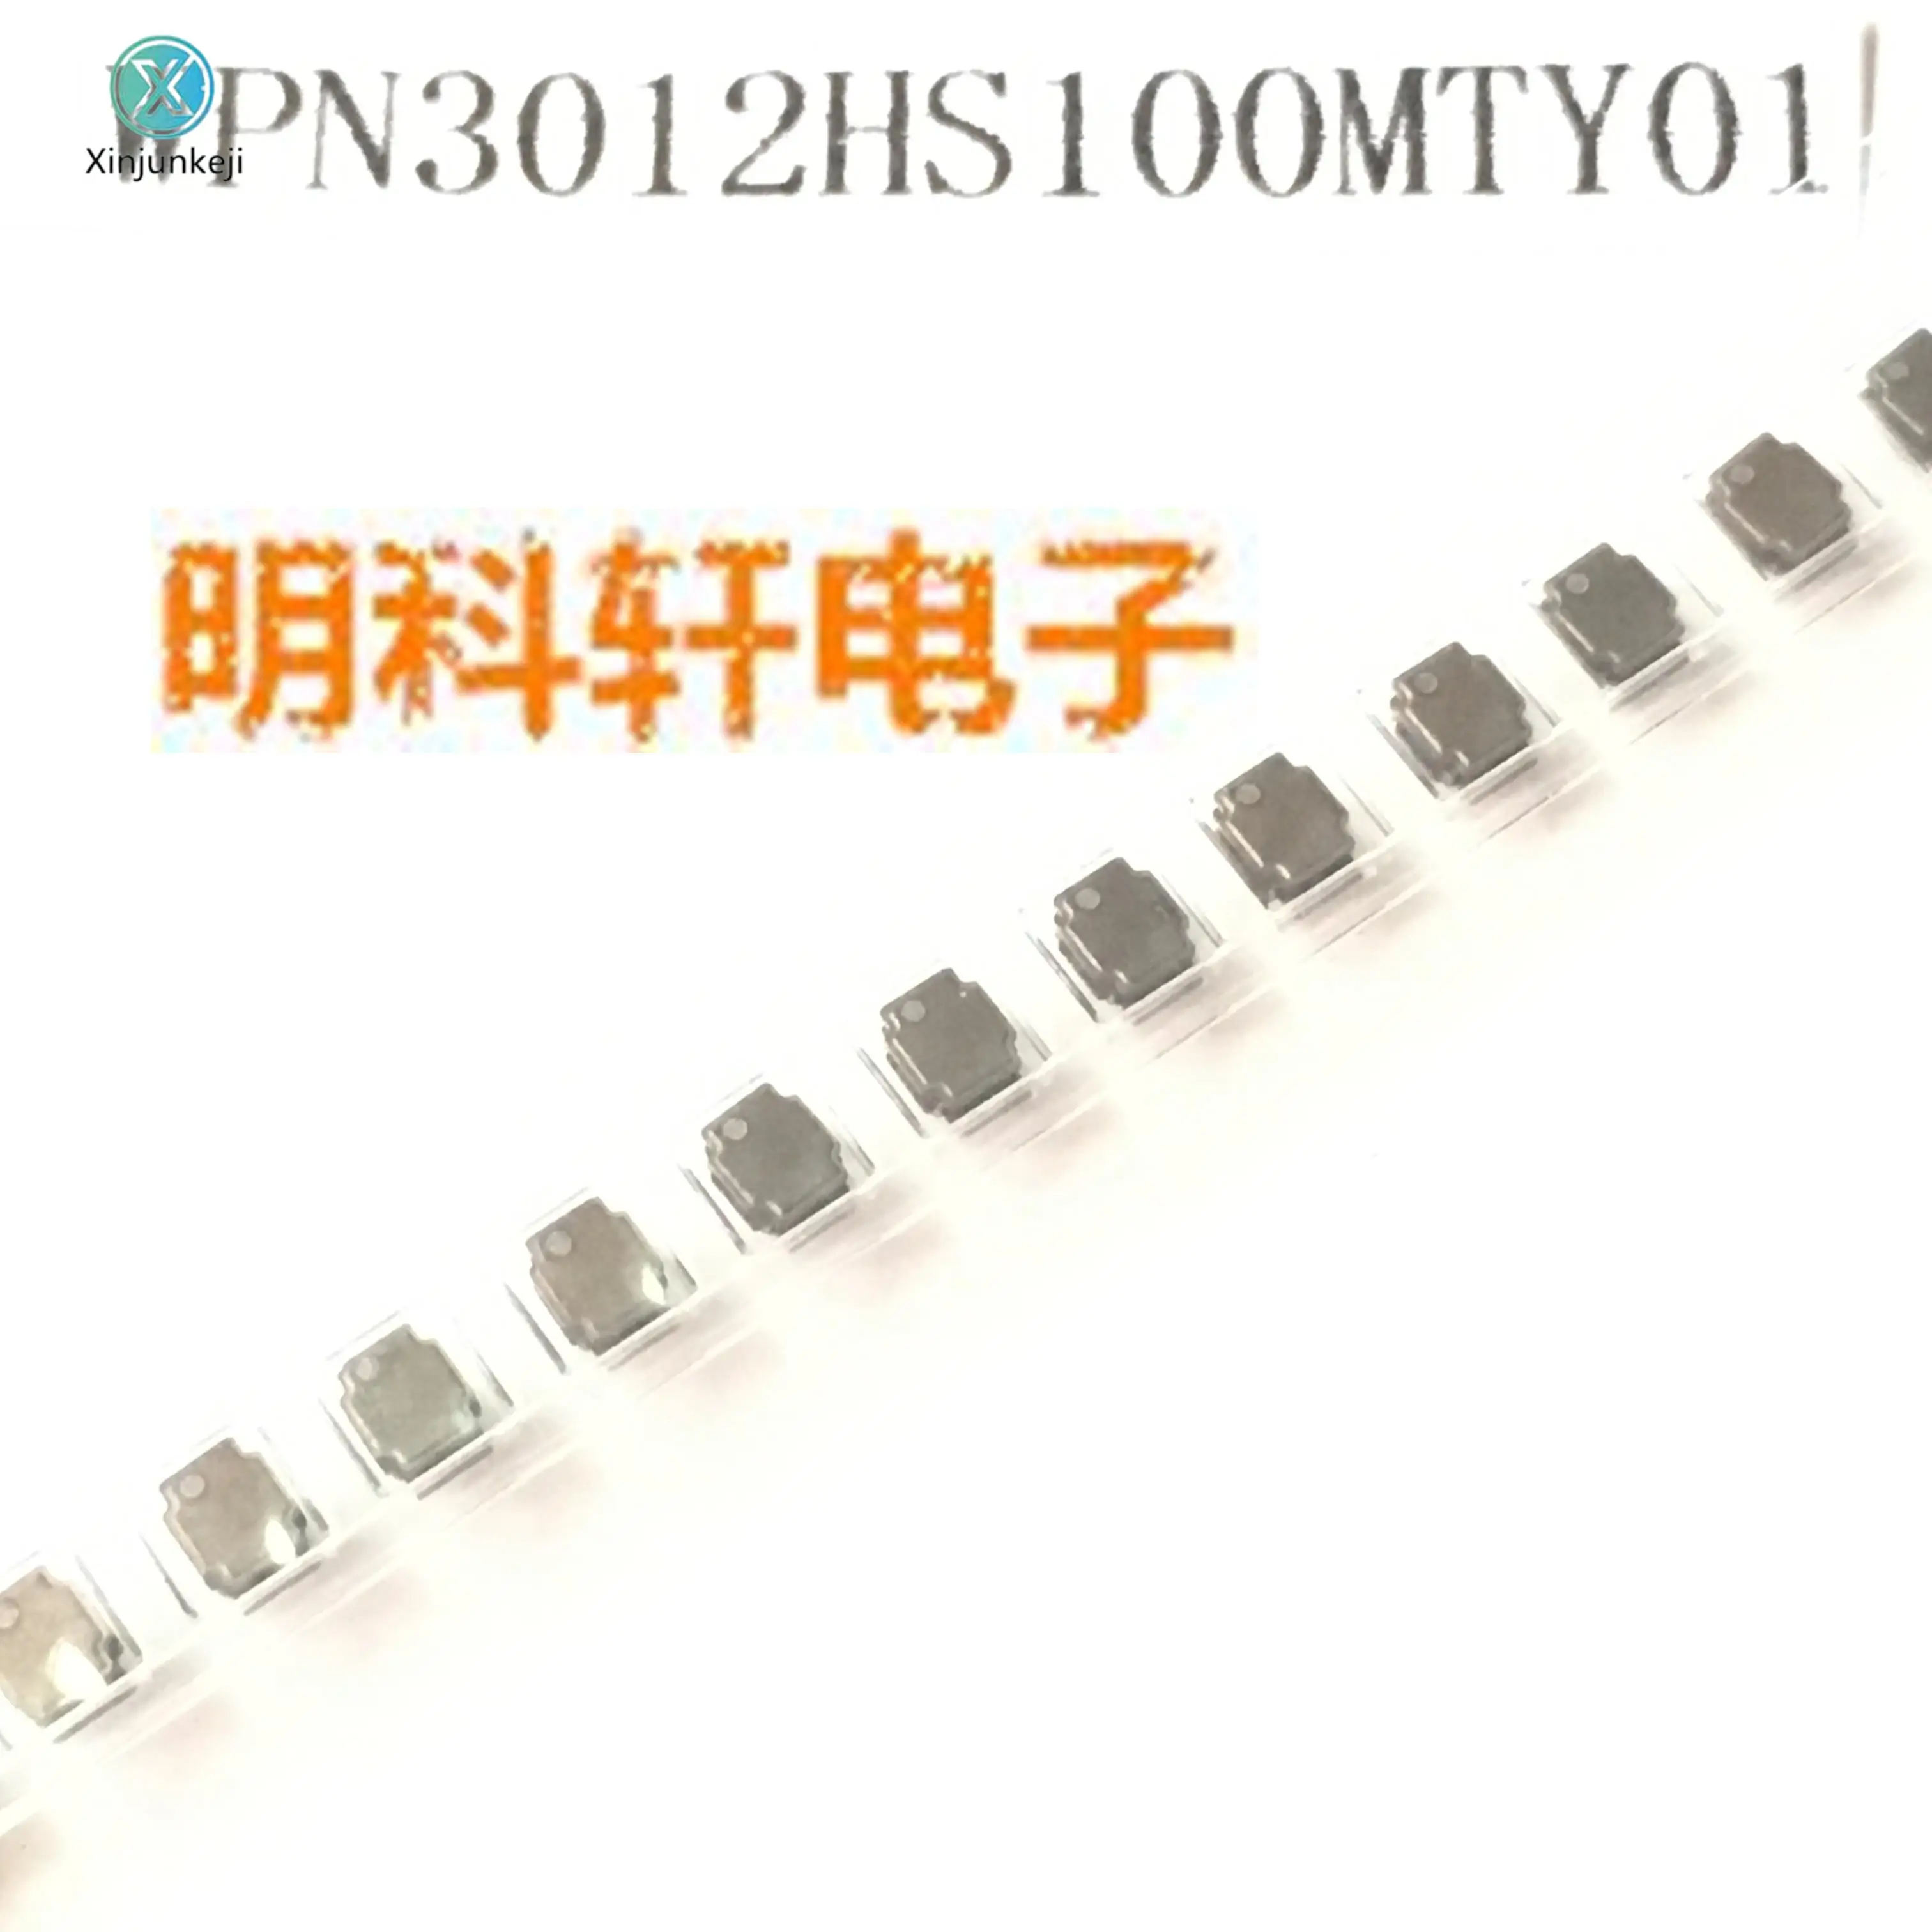 

30pcs orginal new WPN3012HS100MTY01 SMD Wound Power Inductor 10UH 3.0*3.0*1.2 ±20%